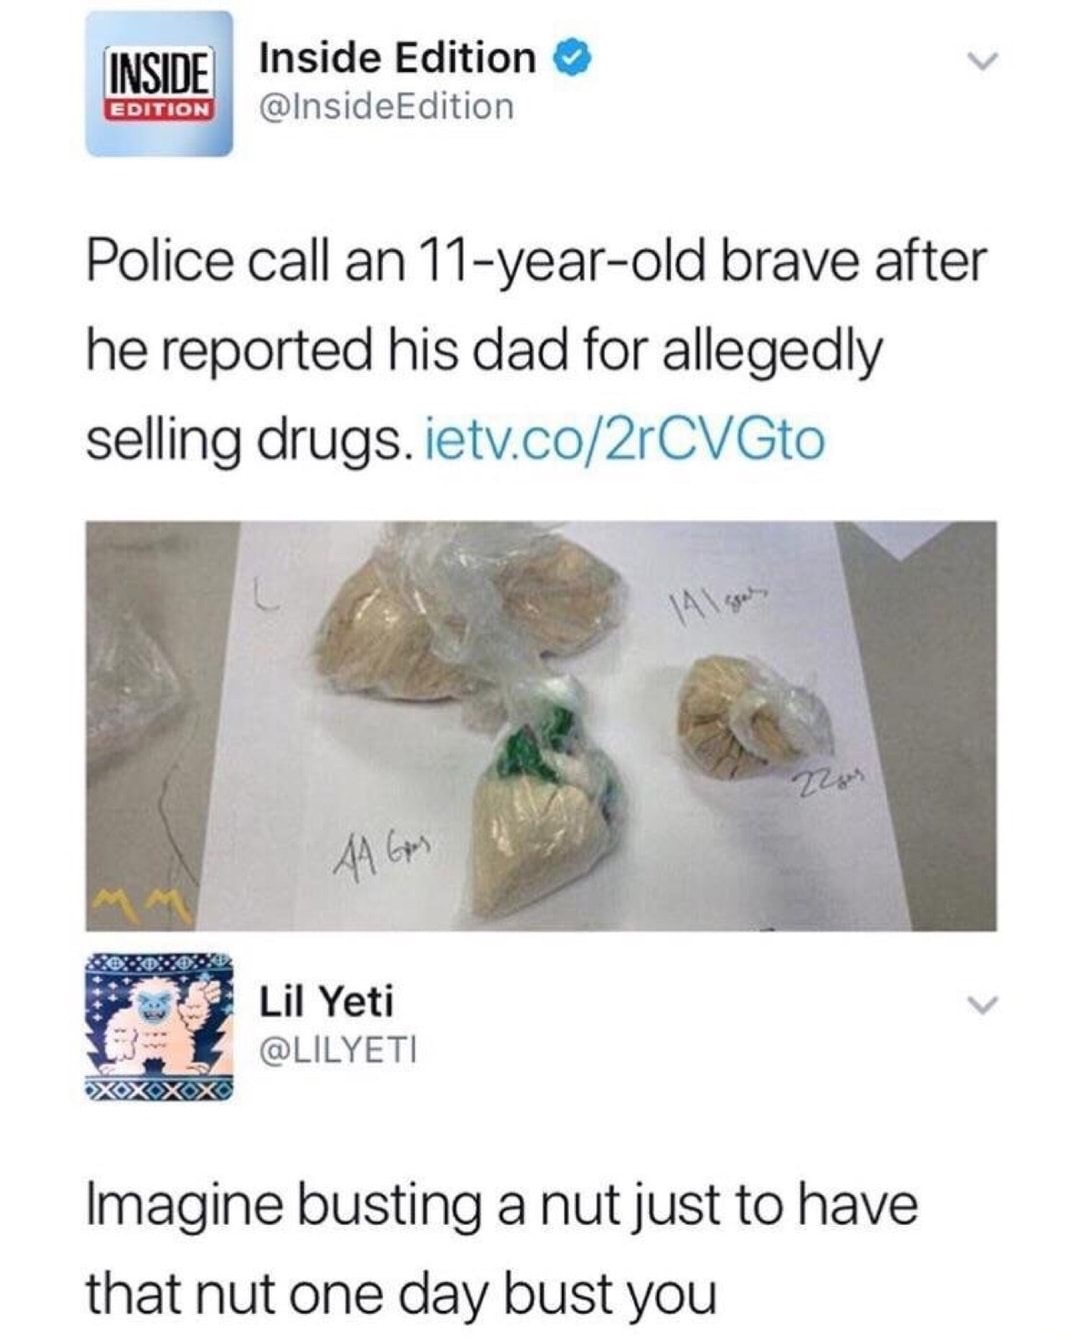 Sunday meme about a kid snitching on his dad to the police